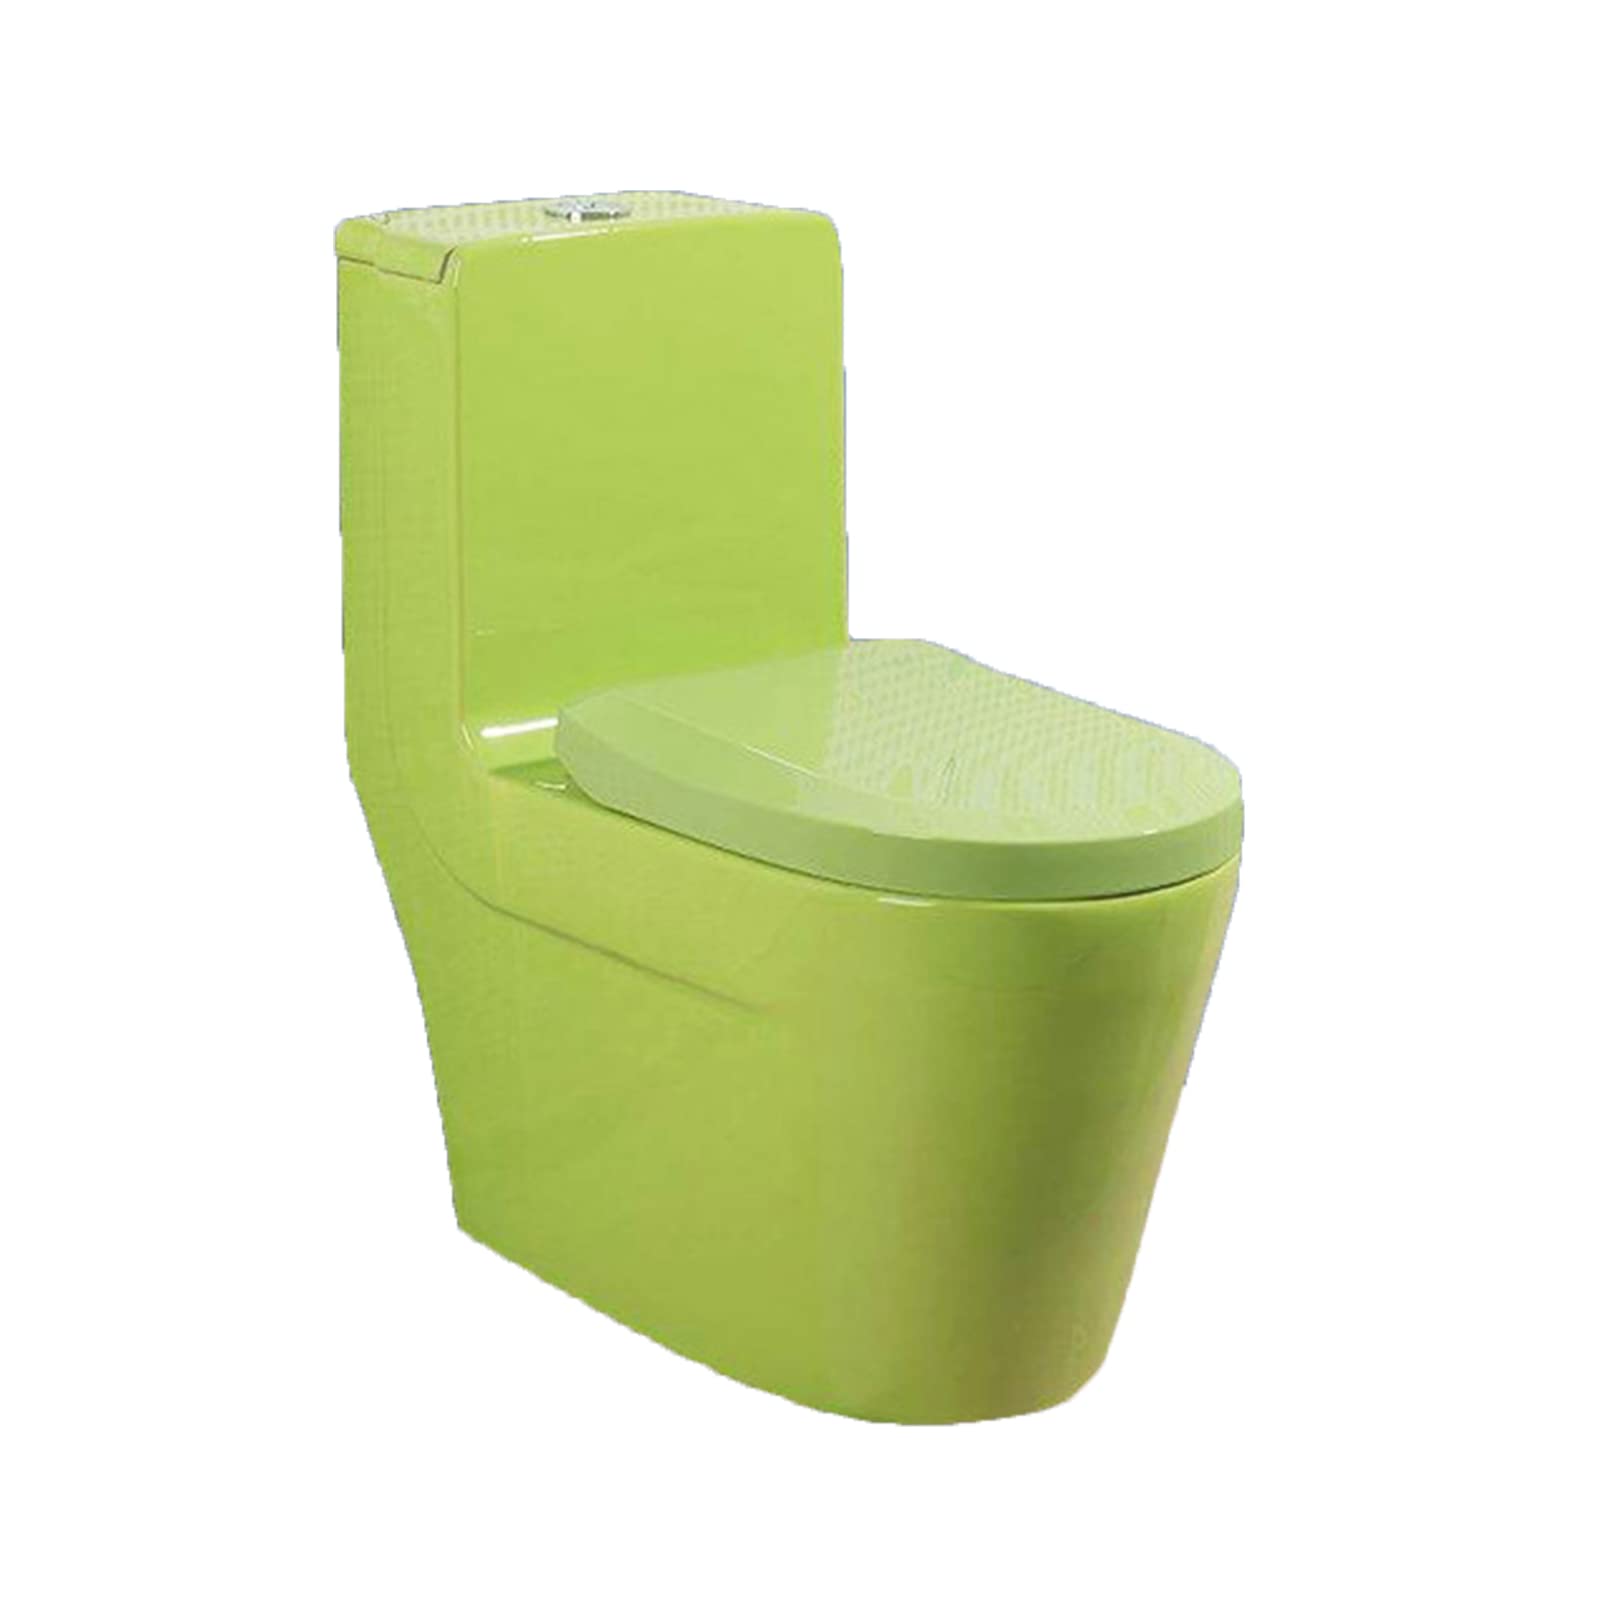 green color toilet for babies Toilet colored green sanitary ware bathroom sets wc ceramic